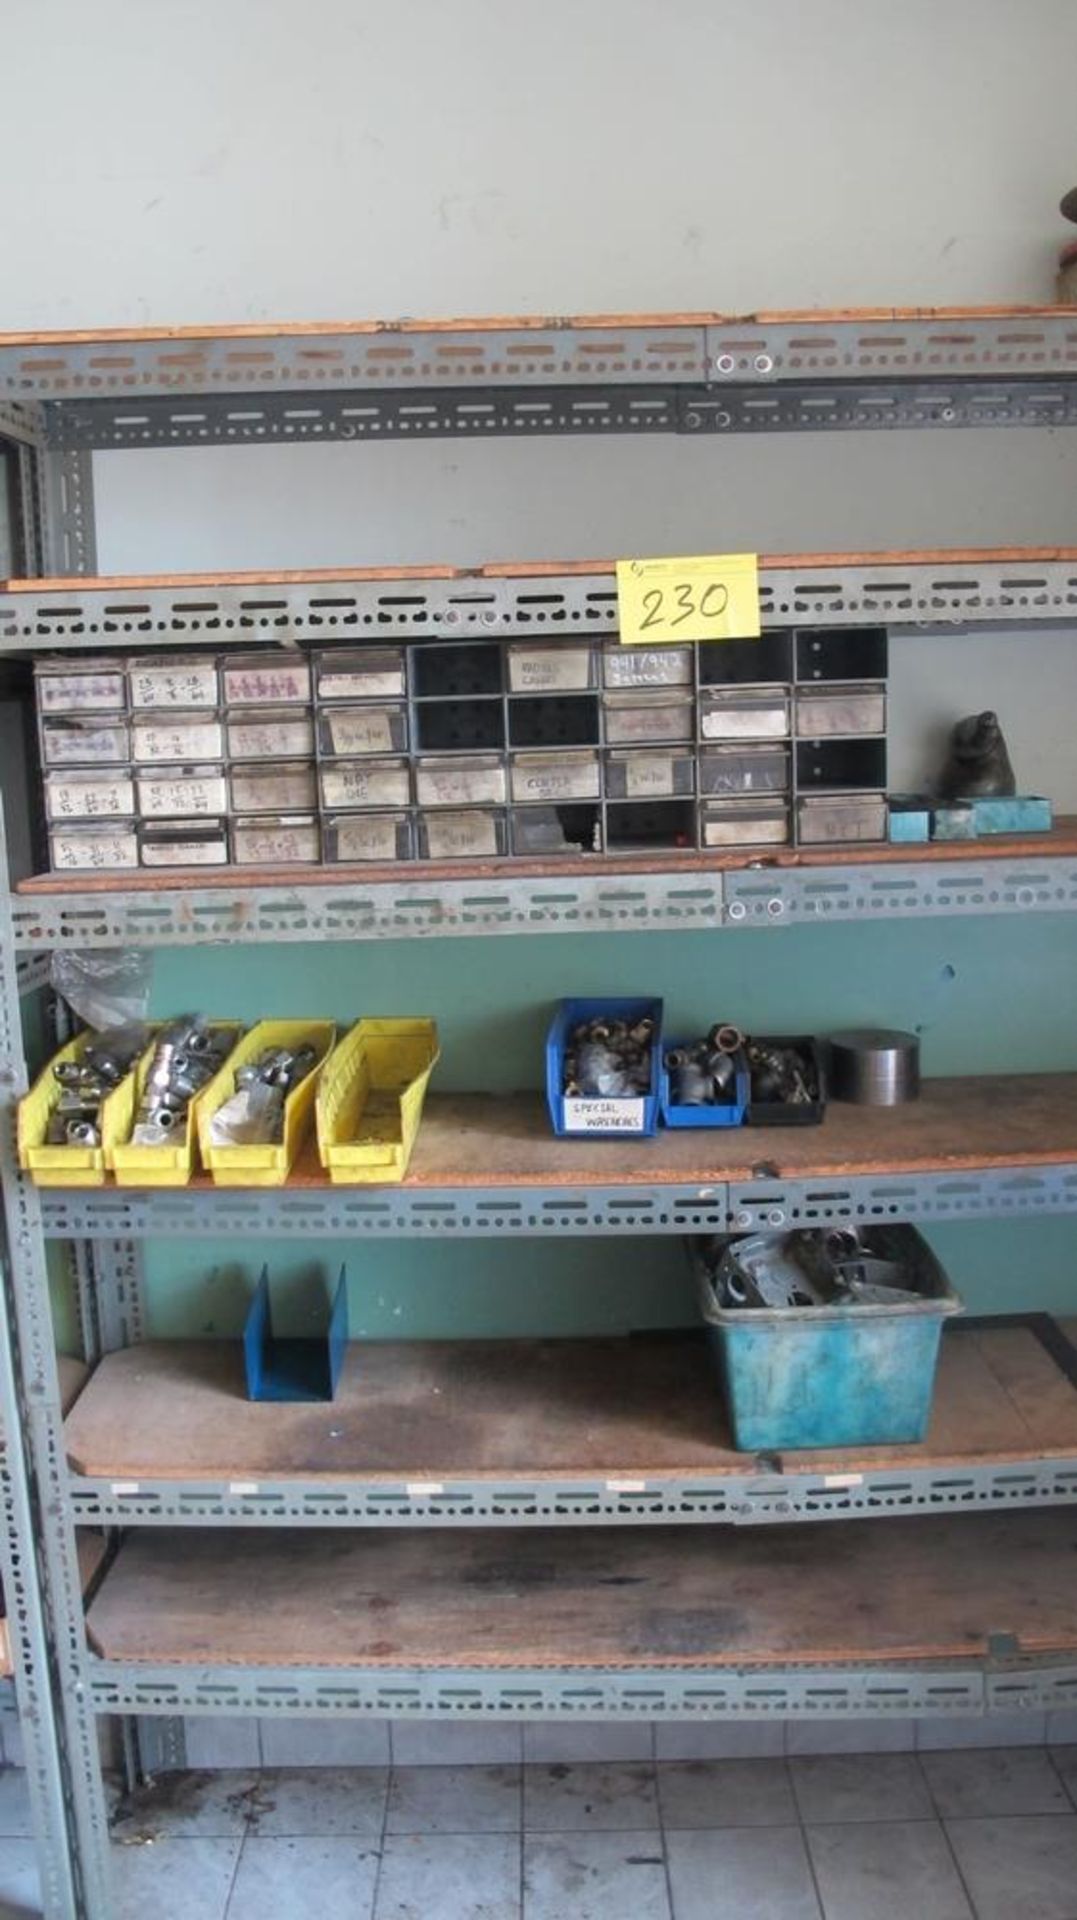 LOT OF (2) SECTIONS OF METAL SHELVING W/ CONTENTS, SHANKS, RADIUS GAUGES, FITTINGS, HARDWARE, ETC. - Image 2 of 8